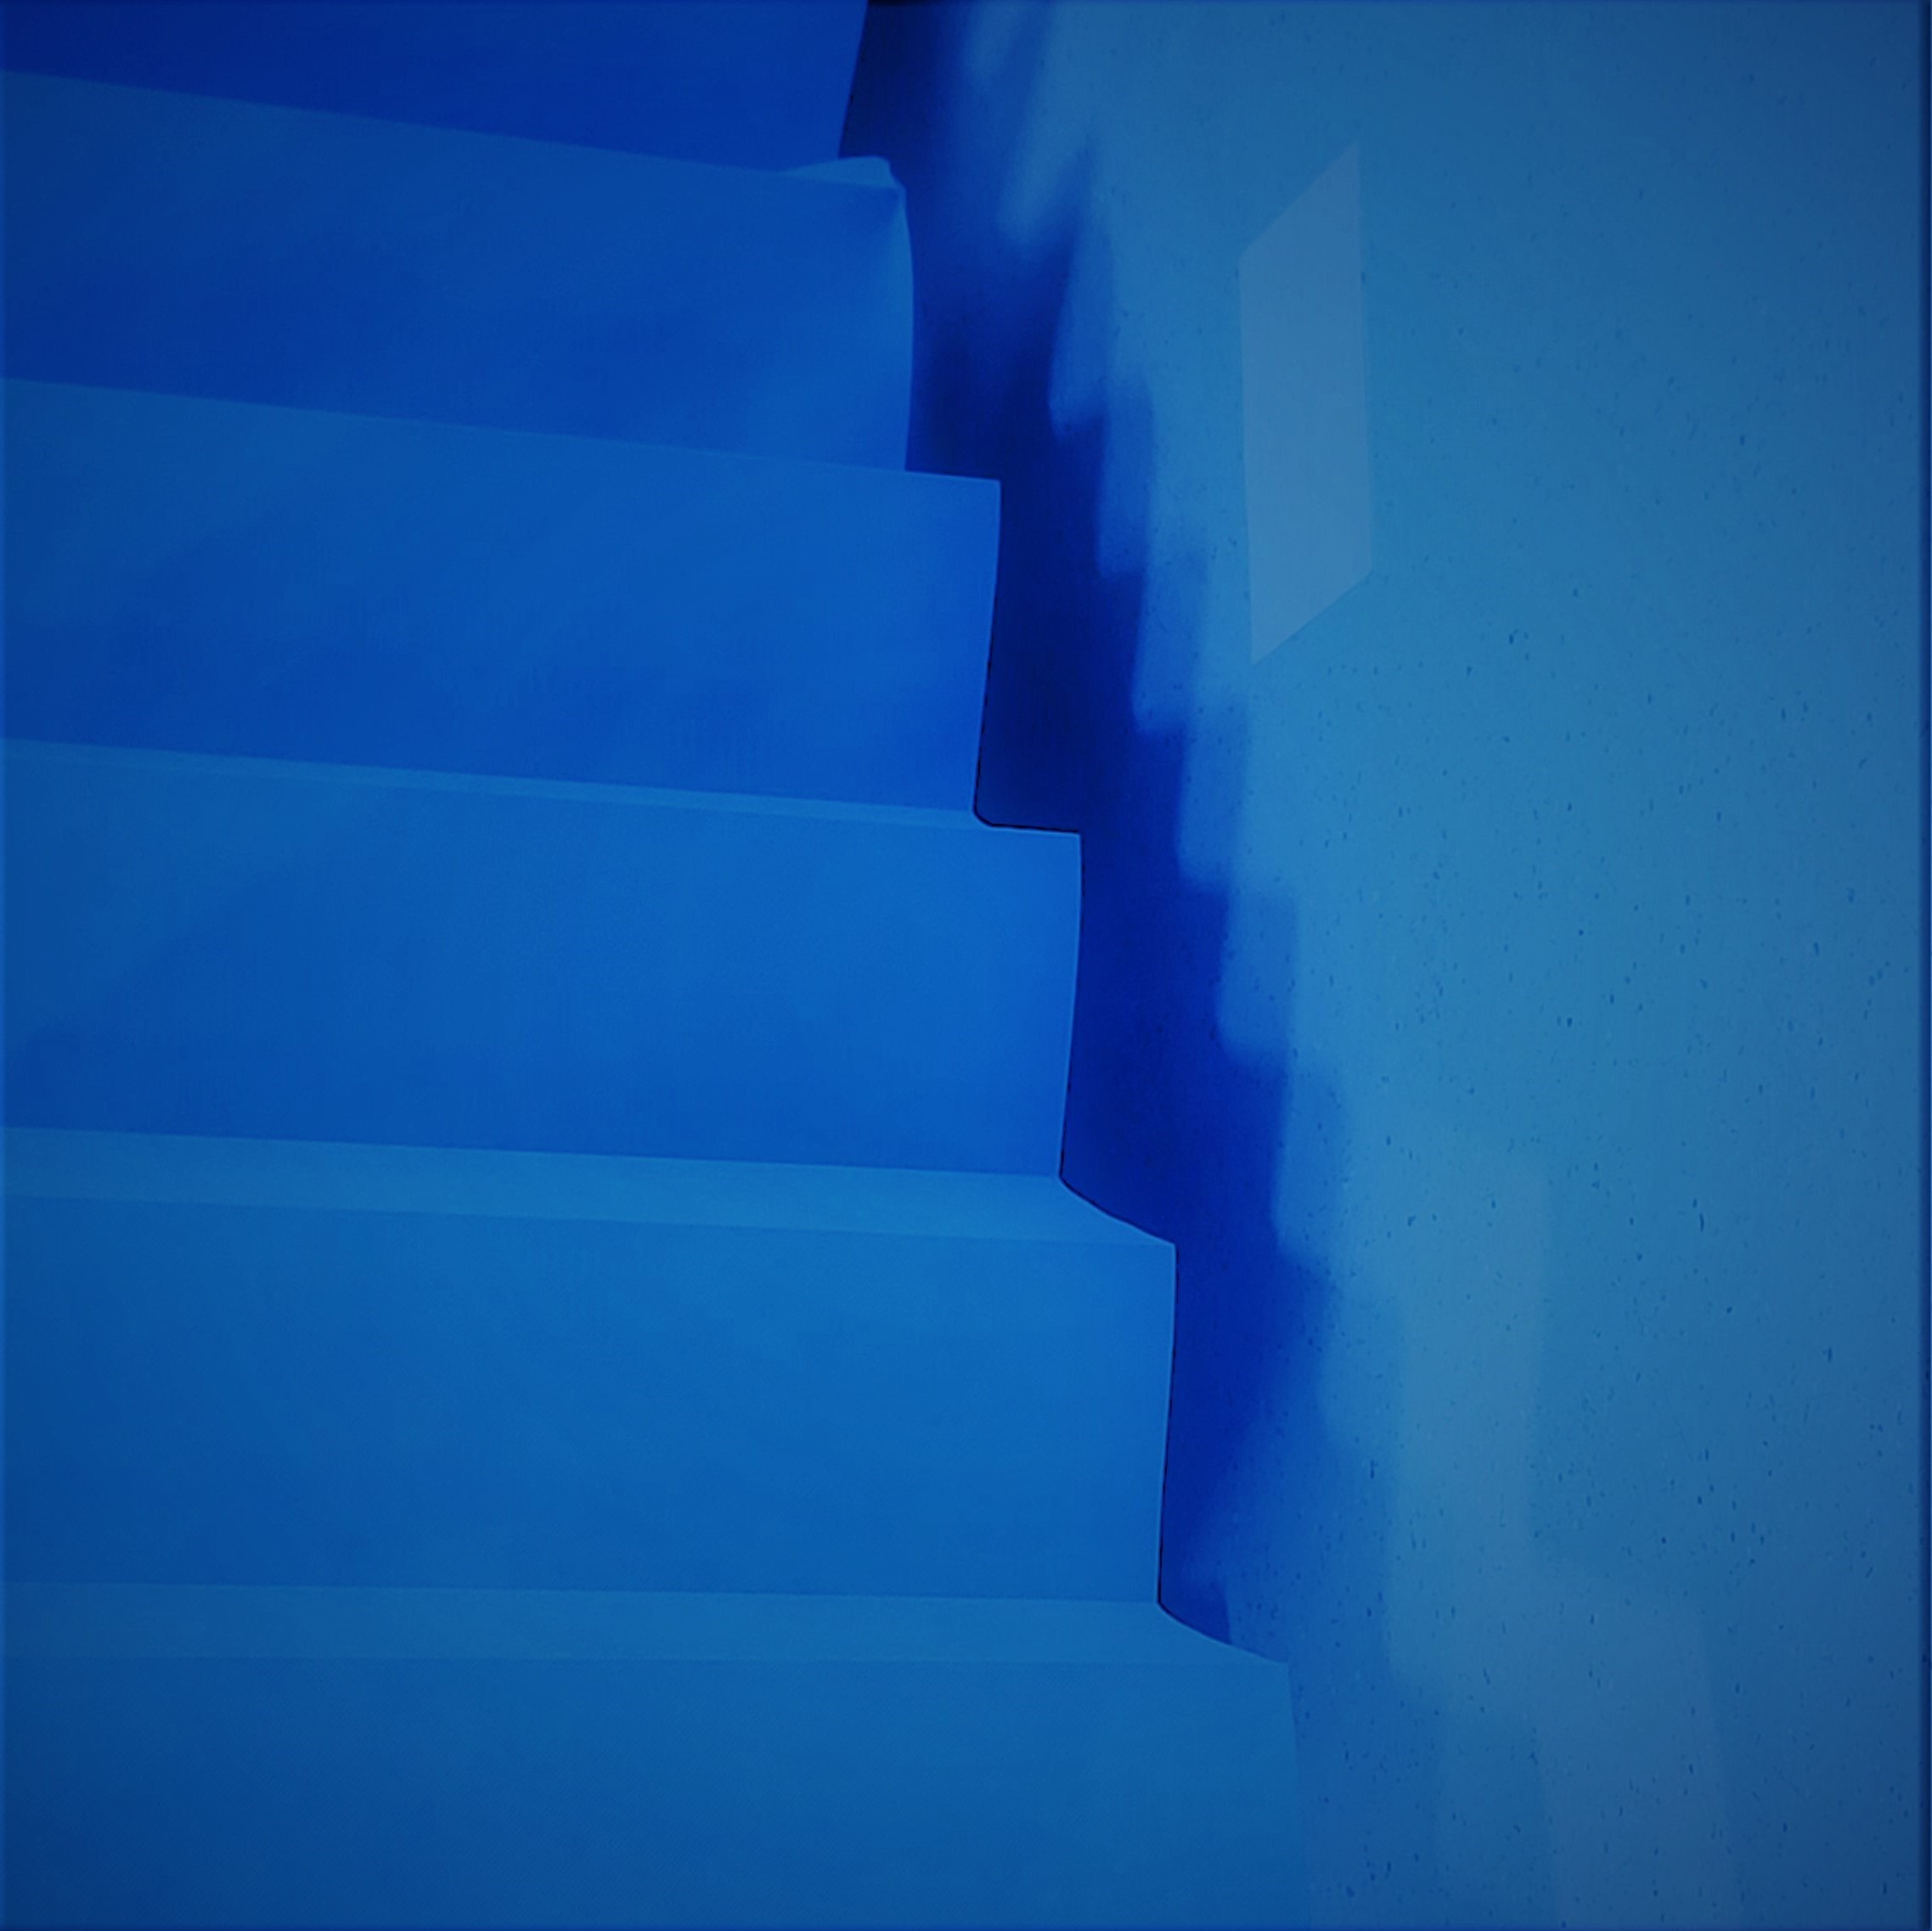 A staircase leading up to the left corner, with a blue tint.